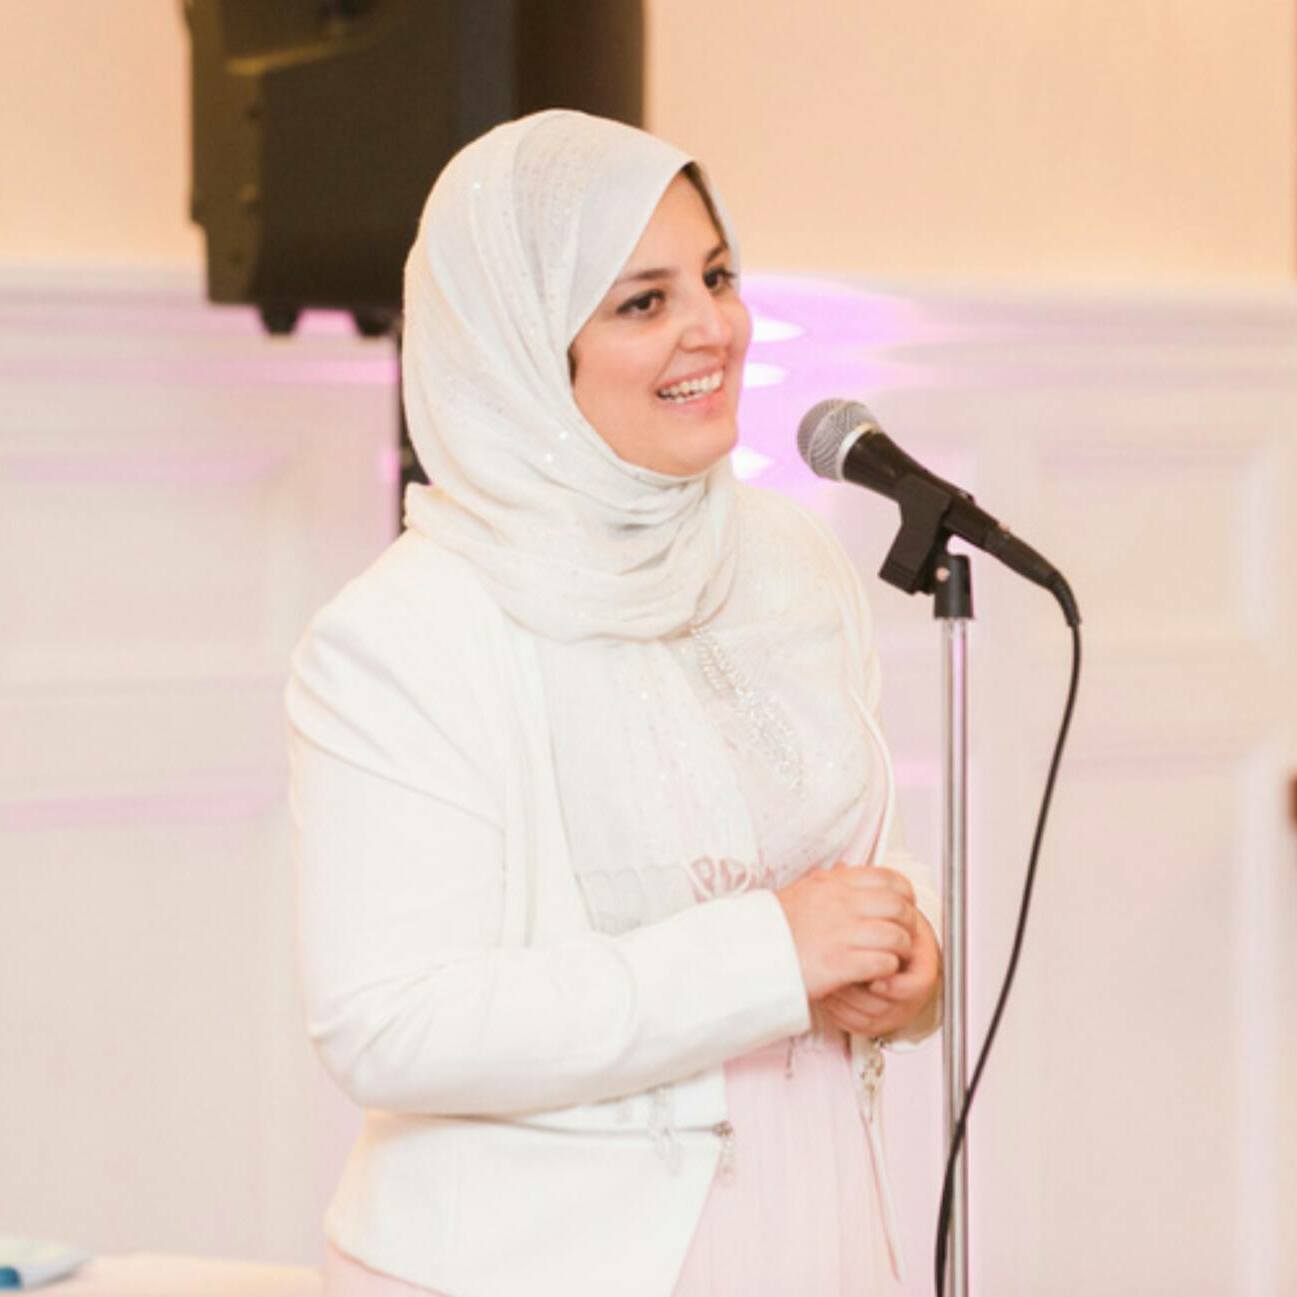 A picture of Mona in an all-white outfit and headscarf. She stands in front of a microphone and is smiling out at an audience.